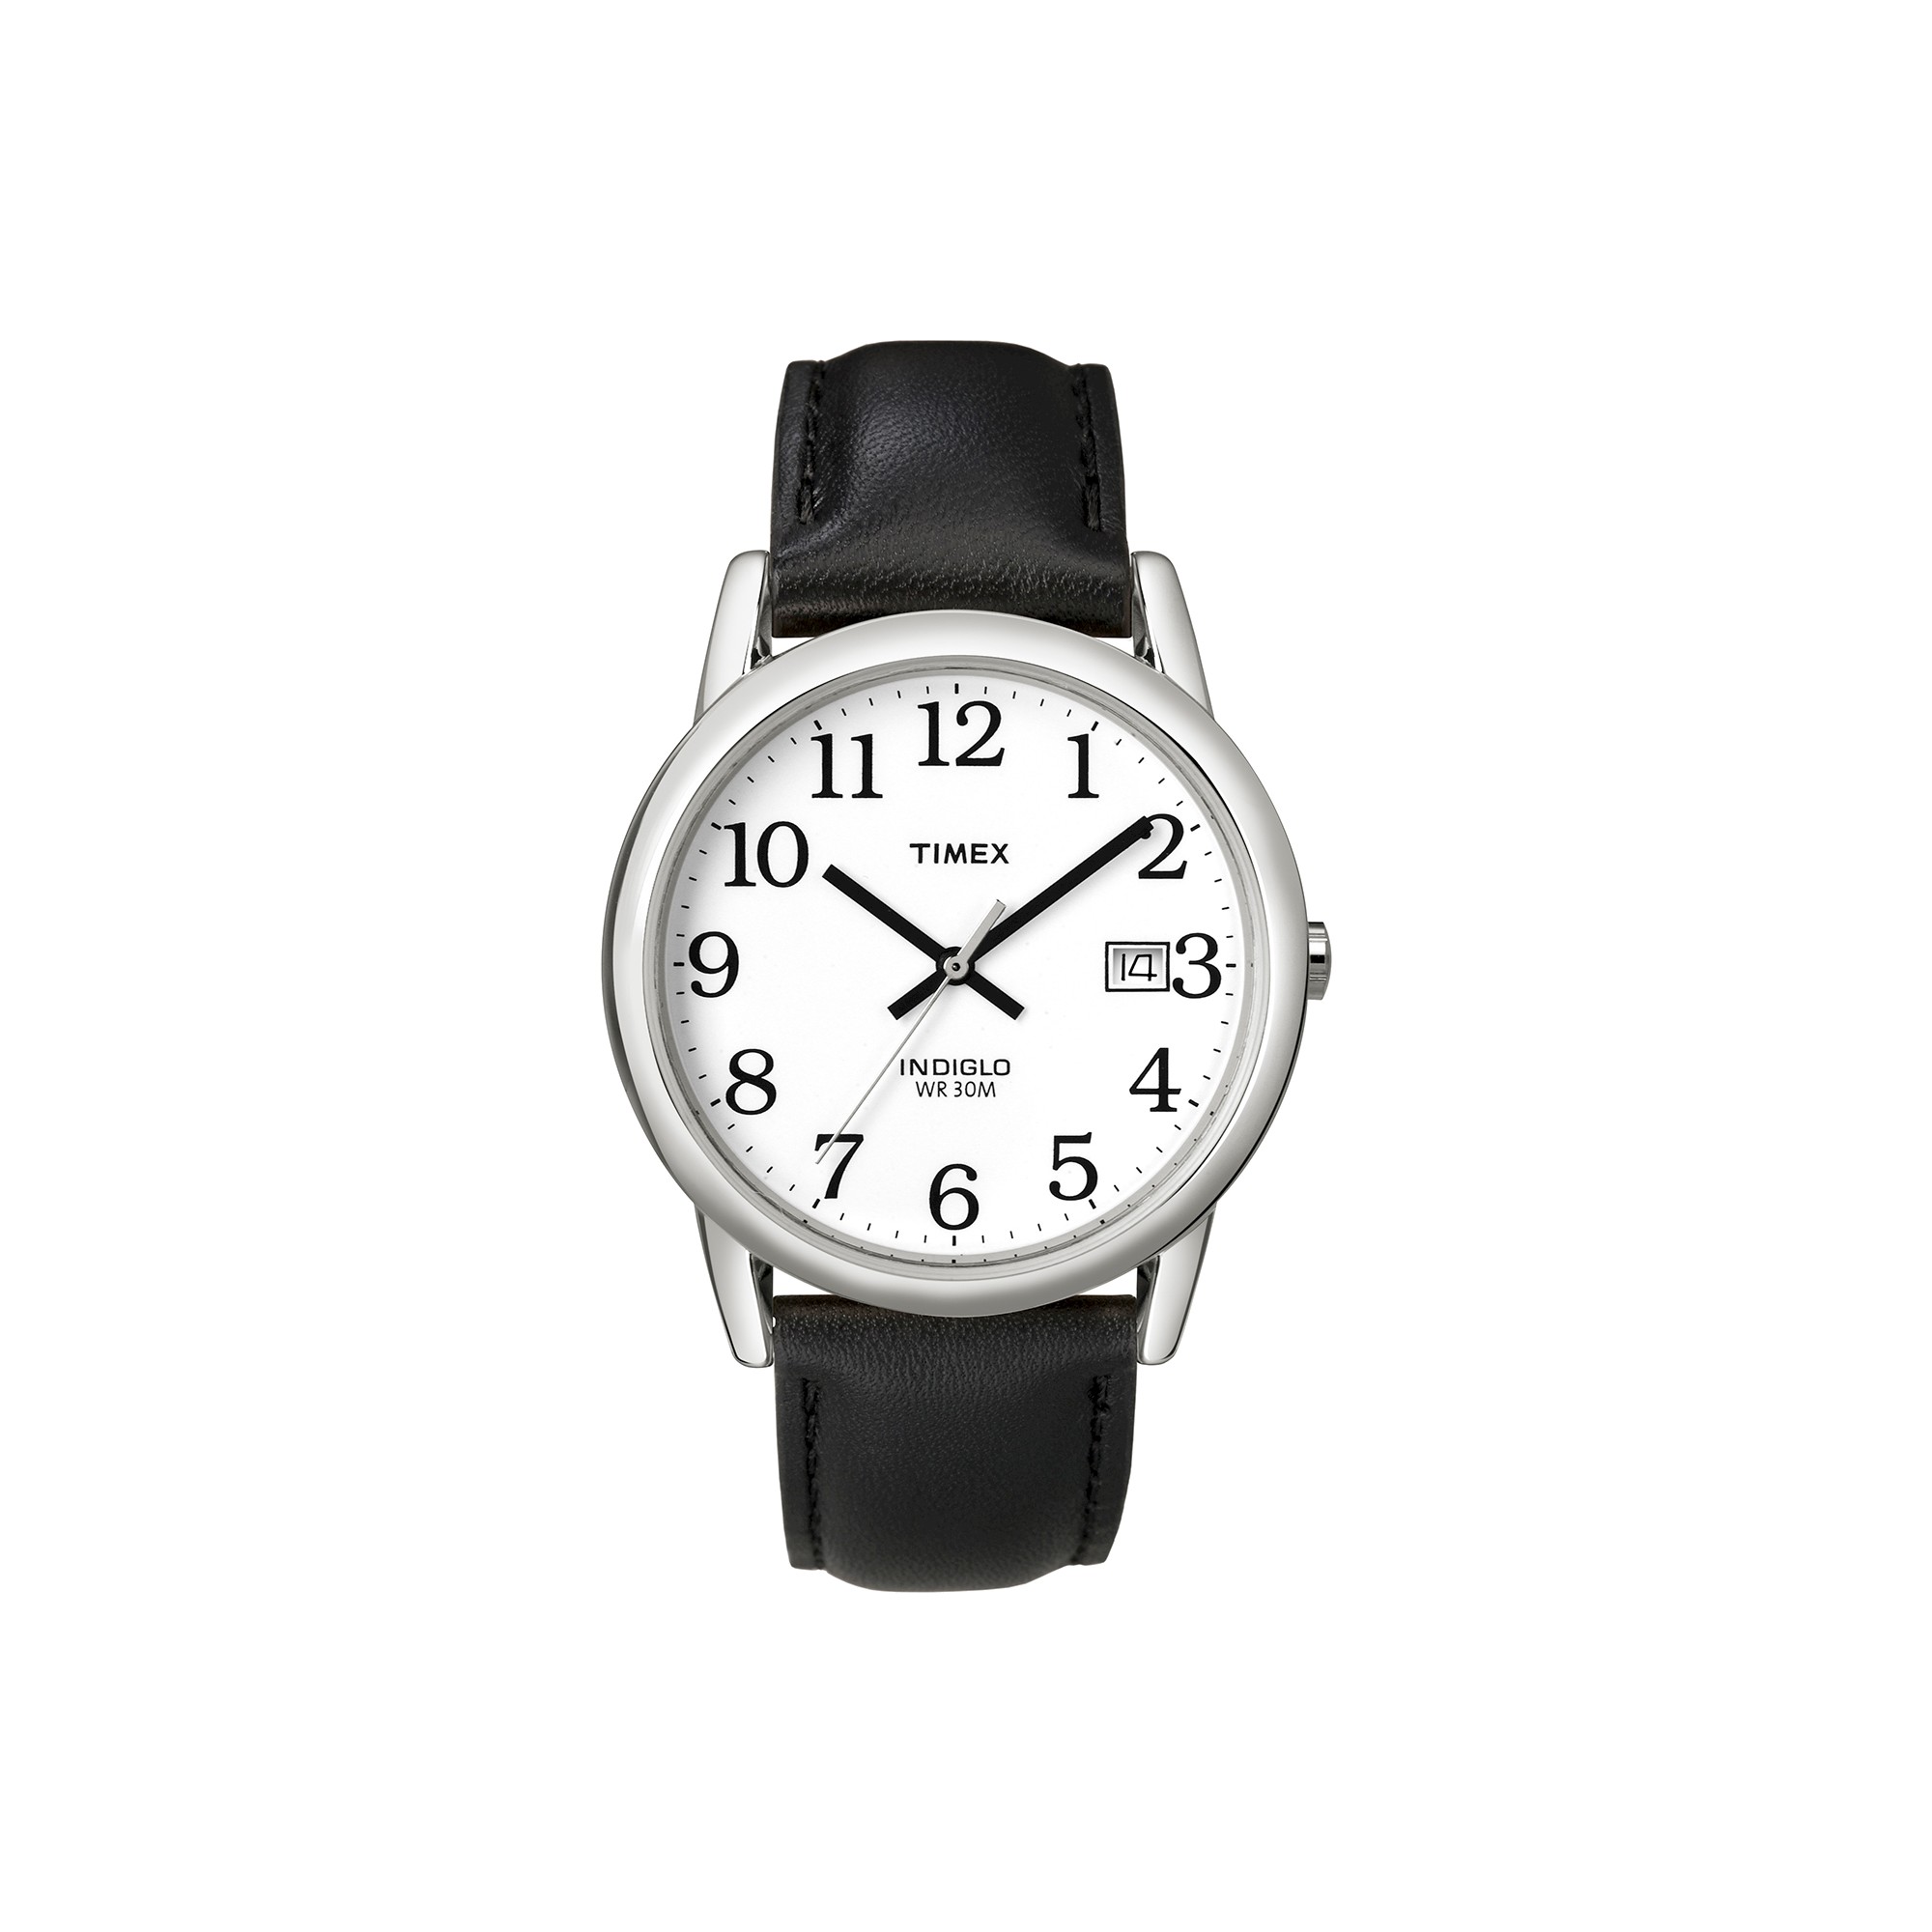 Men's Timex Easy Reader Watch with Leather Strap - Silver/Black T2H281JT, Size: Small